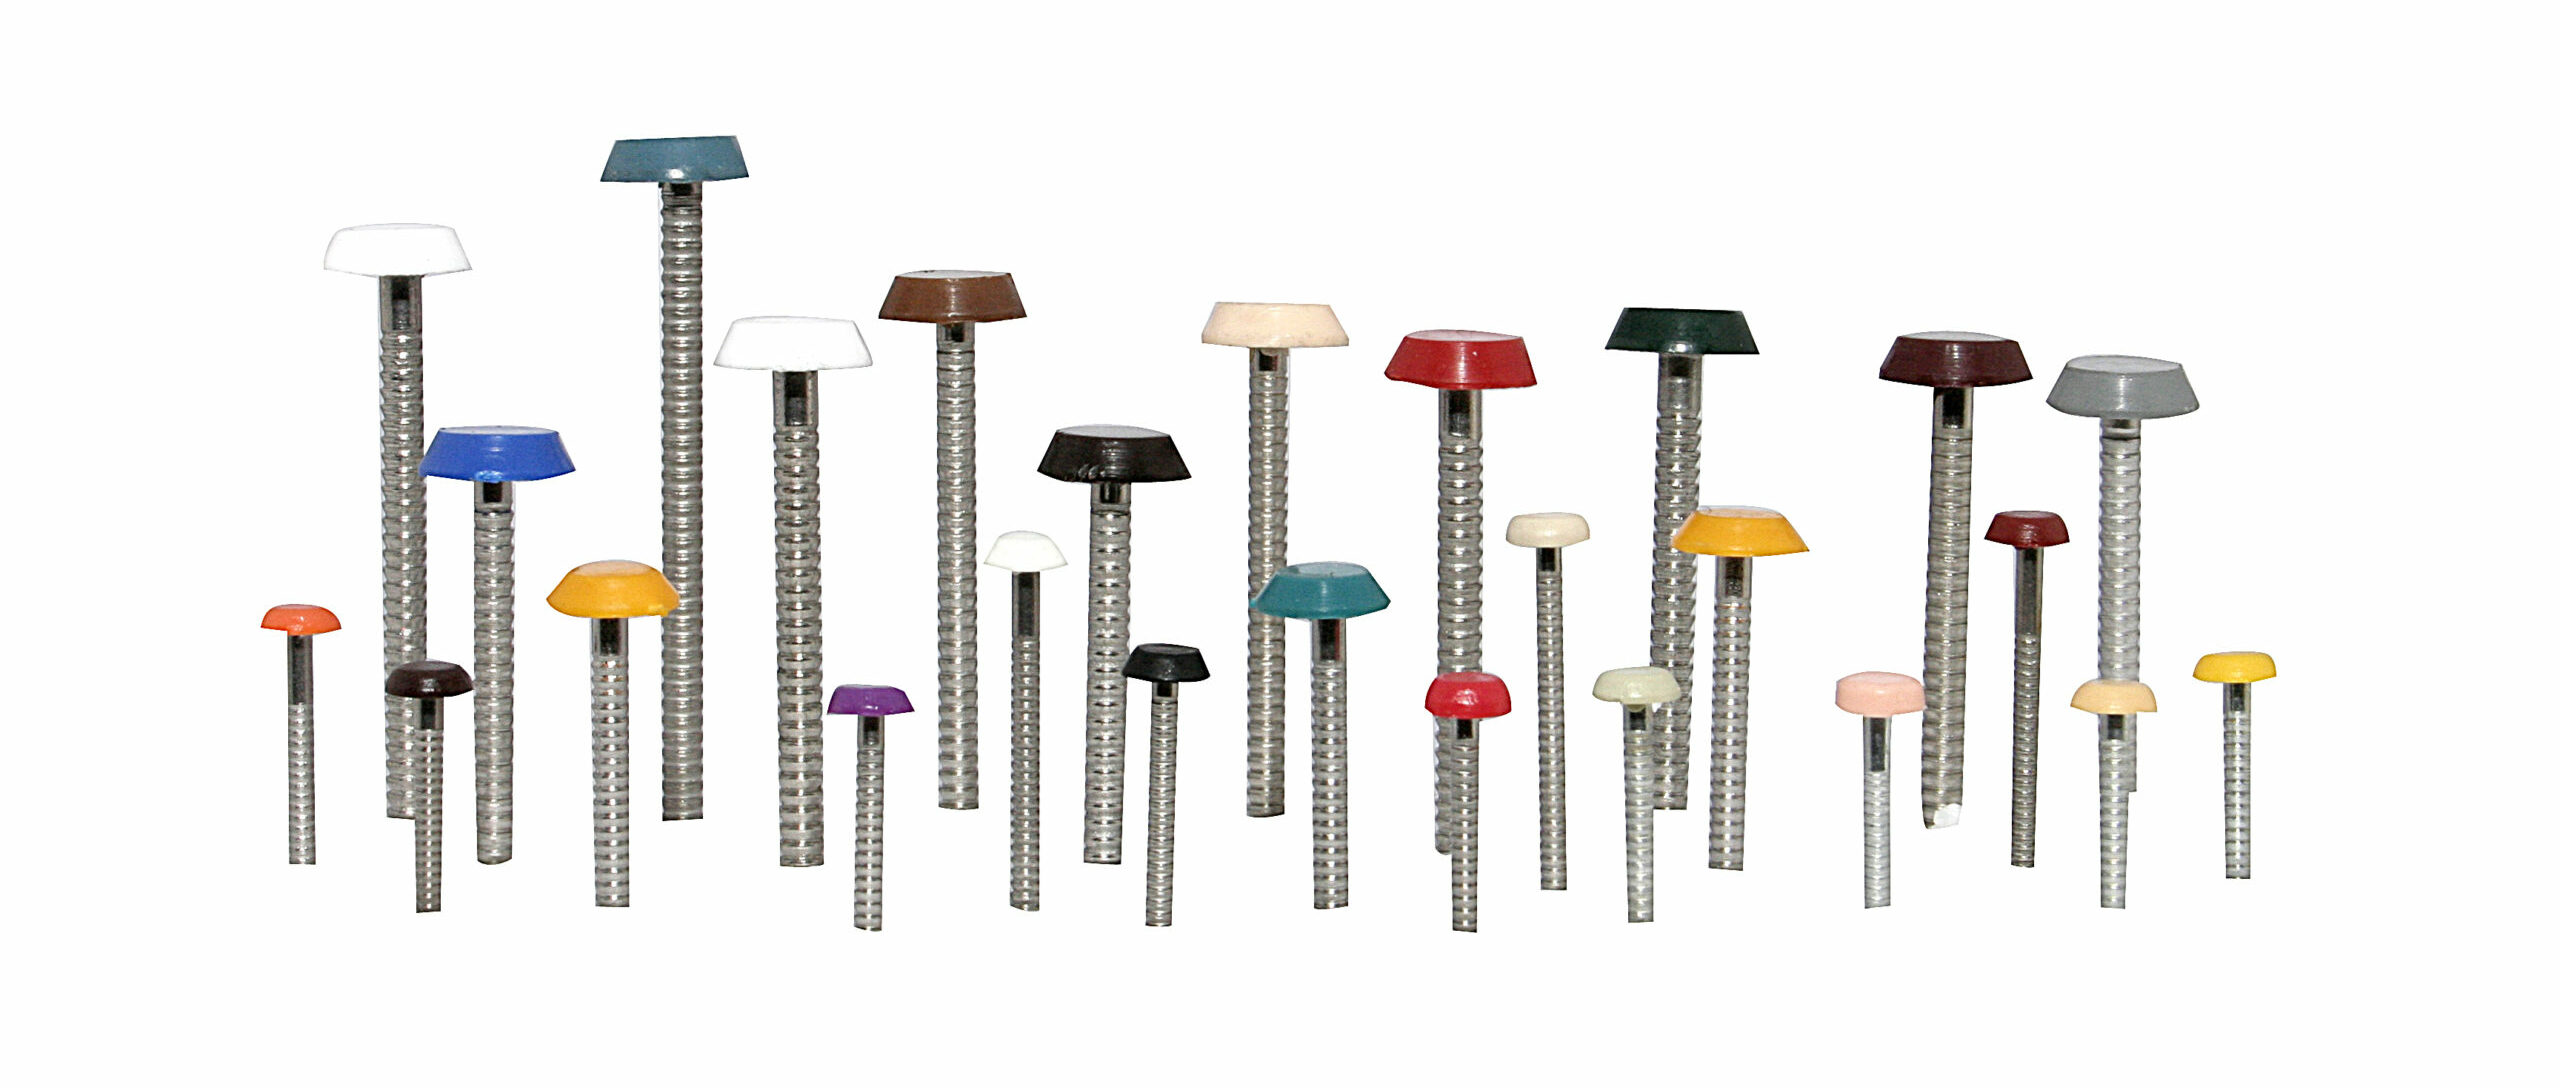 Be a Trade stockist of SEAC's products POLYTOPS® plastic topped pins, nails and screws manufacterer in the UK